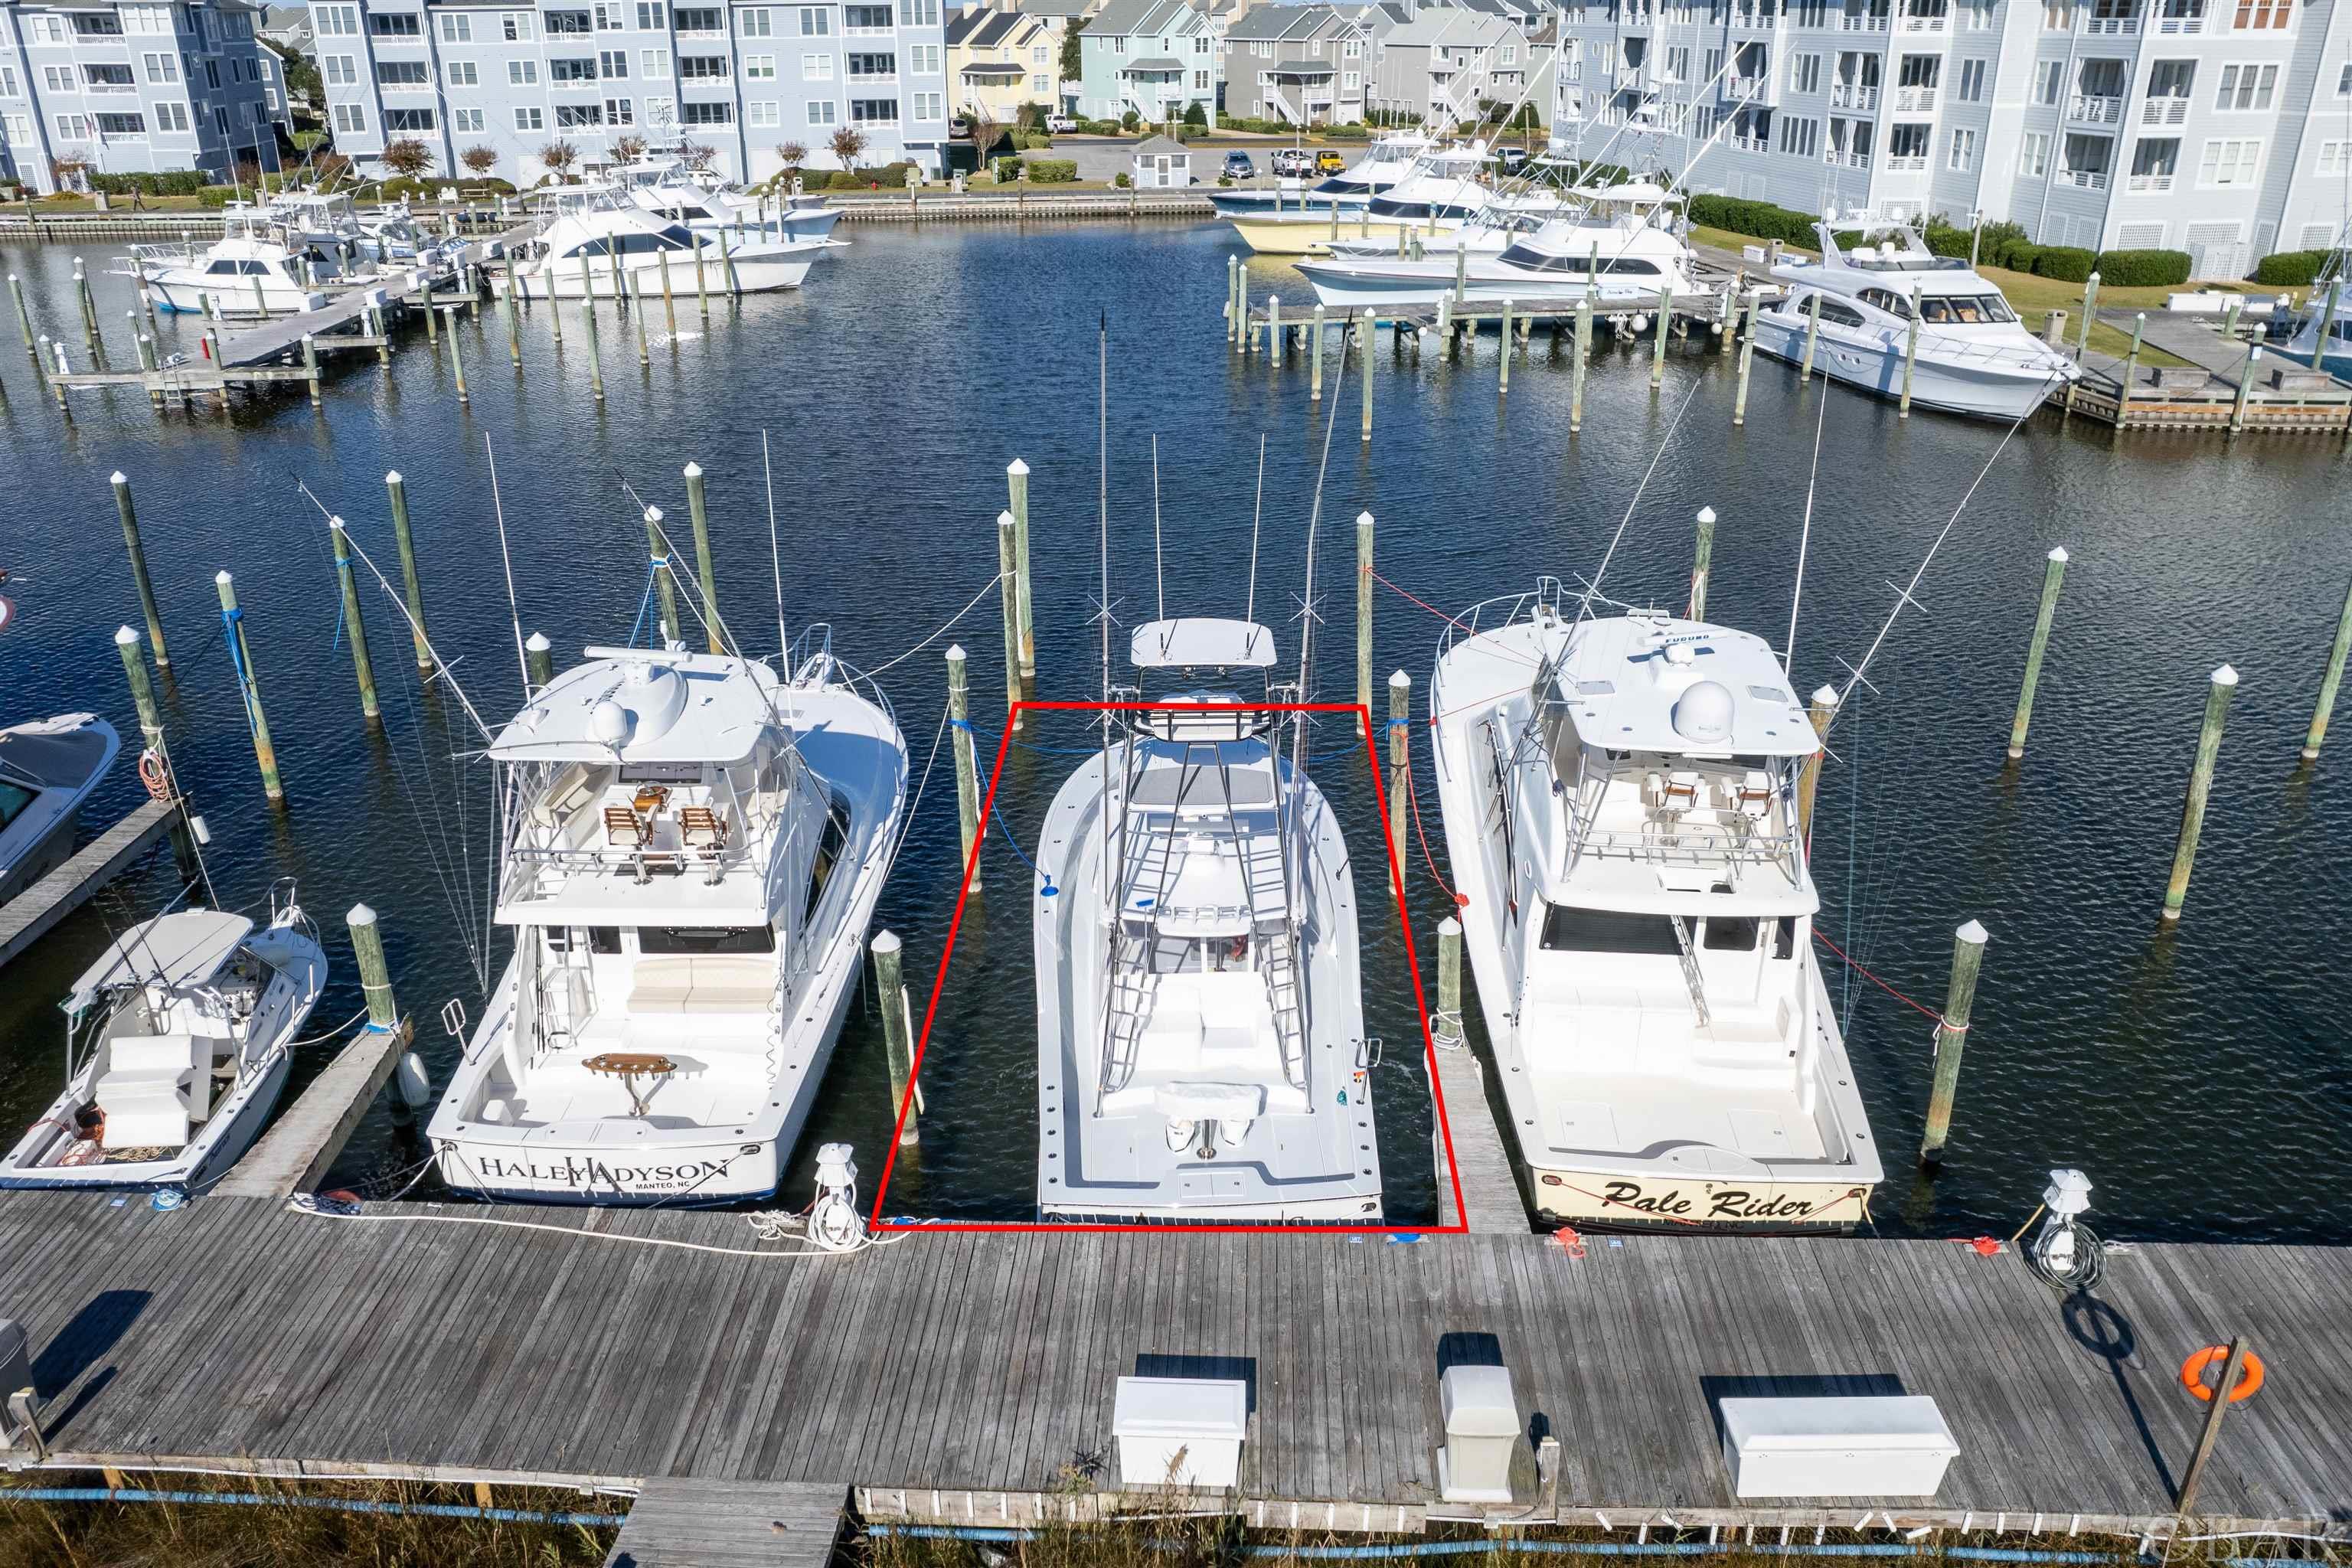 Located on G Dock, this 75FT x 21.6W boat slip has location value with easy sound access and parking.  Pirate's Cove Marina is a protected, deep water, full service marina with 195 slips and a charter fleet of sport fish boats for offshore, nearshore and inlet fishing.  Pirate's Cove Marina is one of the largest world-class marinas on the East Coast with a high level of experienced charter sport fishing captains and crew. Pirate's Cove Marina offers: a fuel dock for non-ethanol gas and diesel, slips with in-slip fueling, private fish cleaning houses, showers, Ship's Store for light provisioning, an on-site full-service restaurant and Tiki Bar, and annual fishing tournaments.  Pirate's Cove Marina is approximately eight miles inside and north of Oregon Inlet via a deepwater, well-marked channel. The fixed bridge clearance of the Manteo/Nags Head causeway is 65 feet at mean high tide.